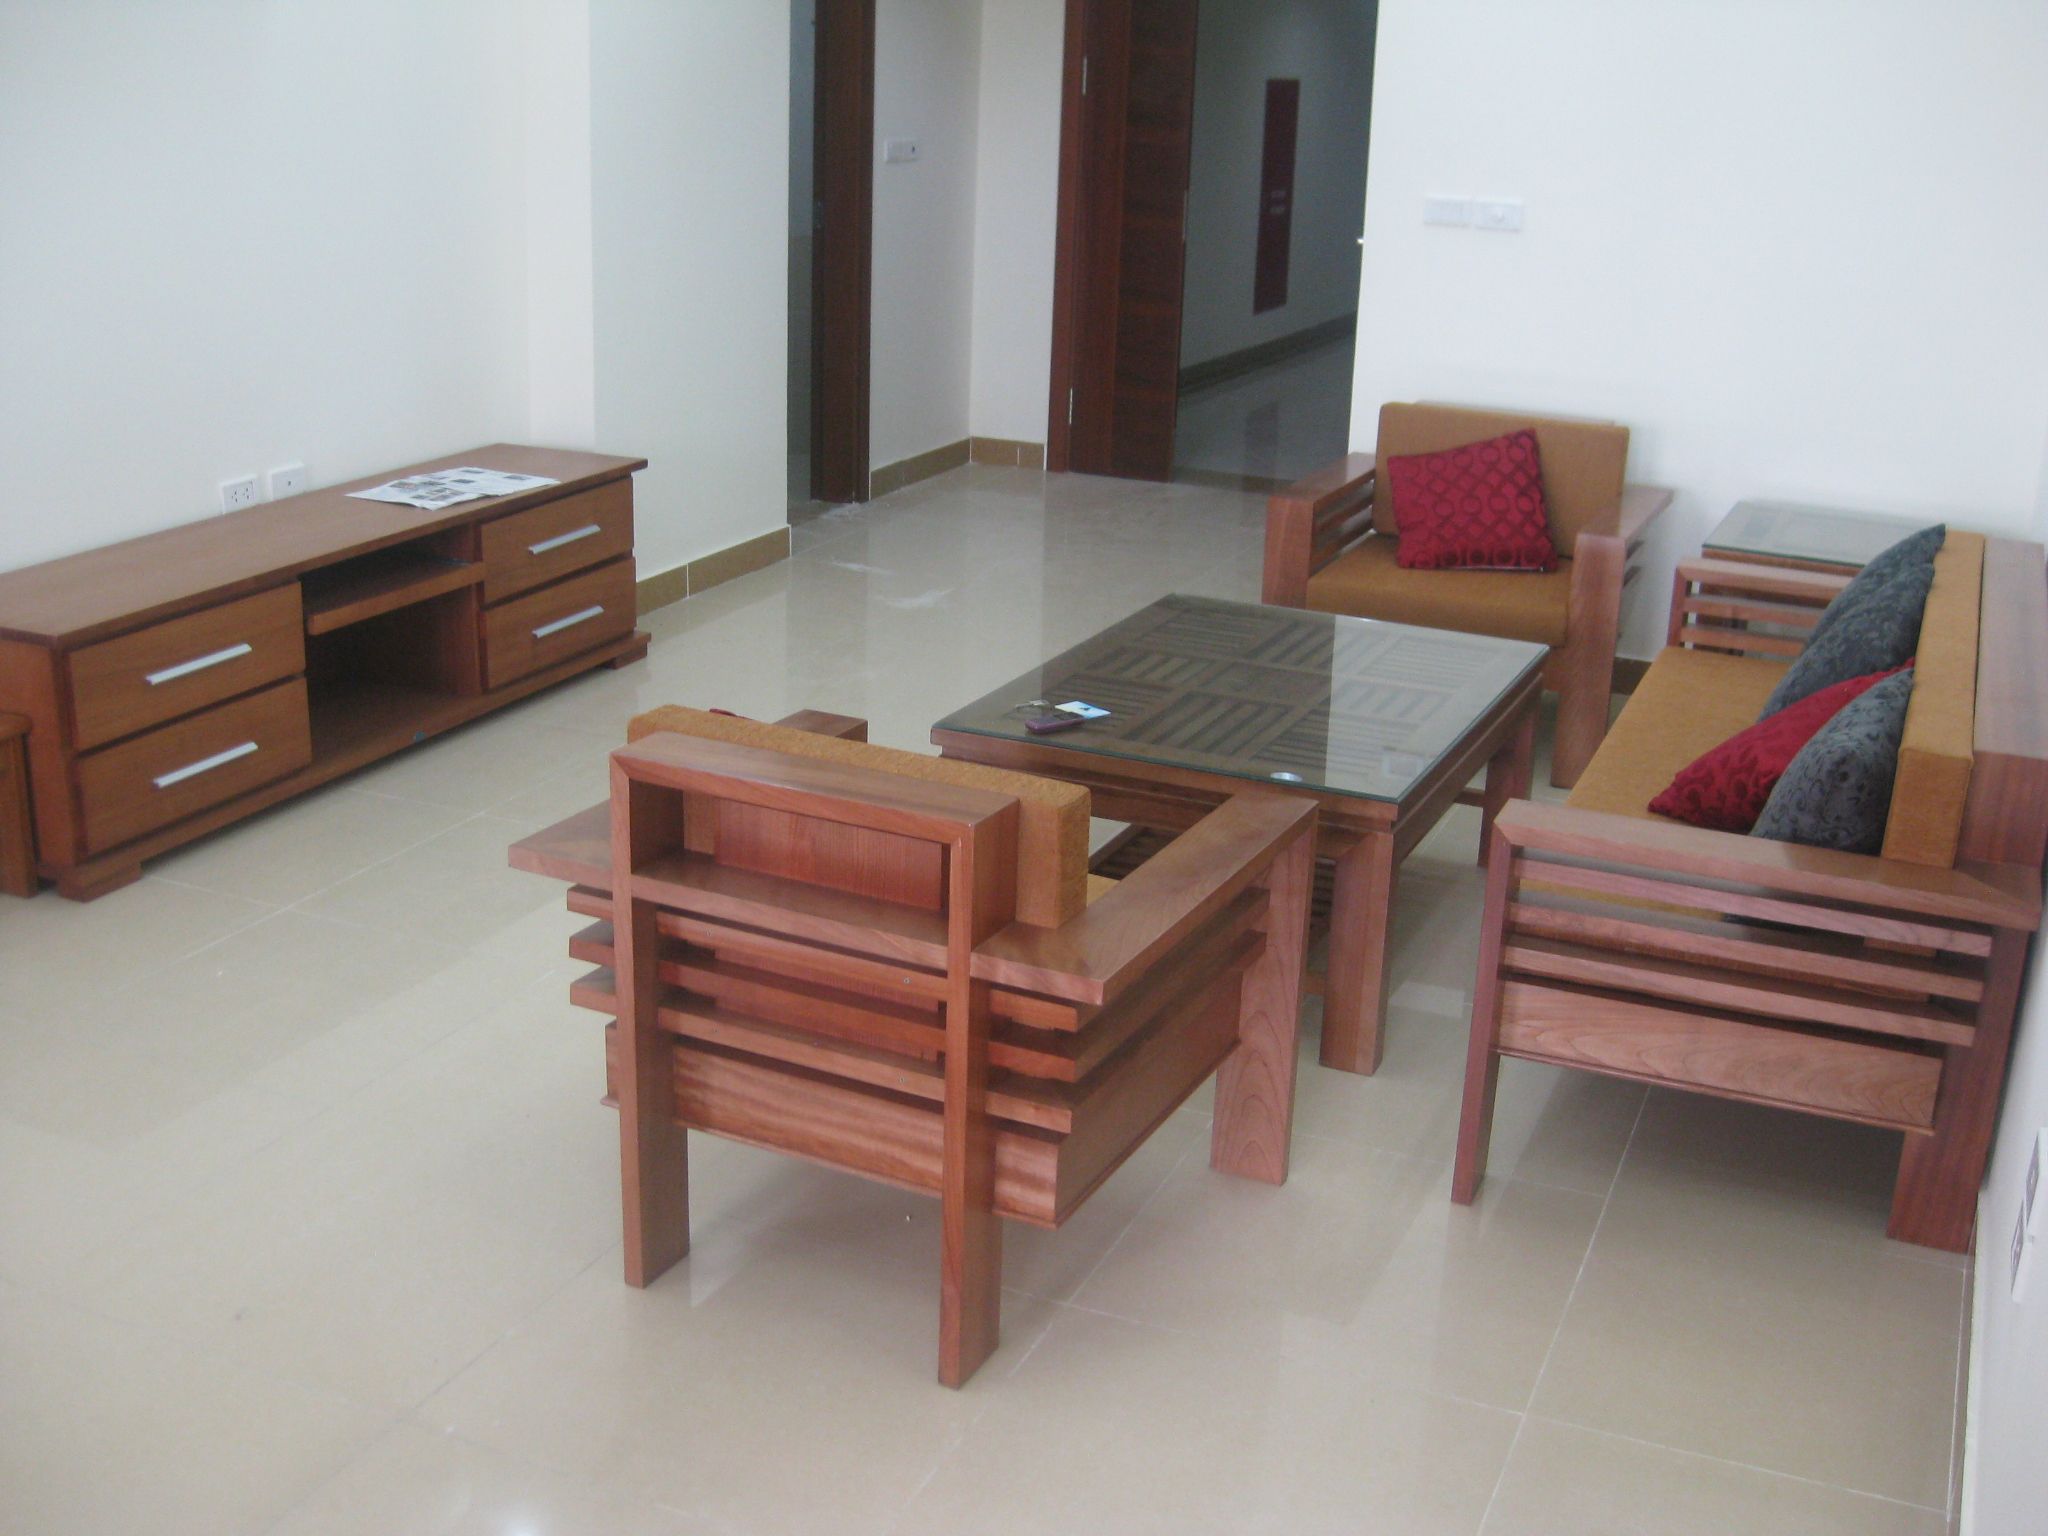 An new apartment for rent in Green Park Building, Duong Dinh Nghe street, Yen Hoa ward, Cau  Giay district, Hanoi.